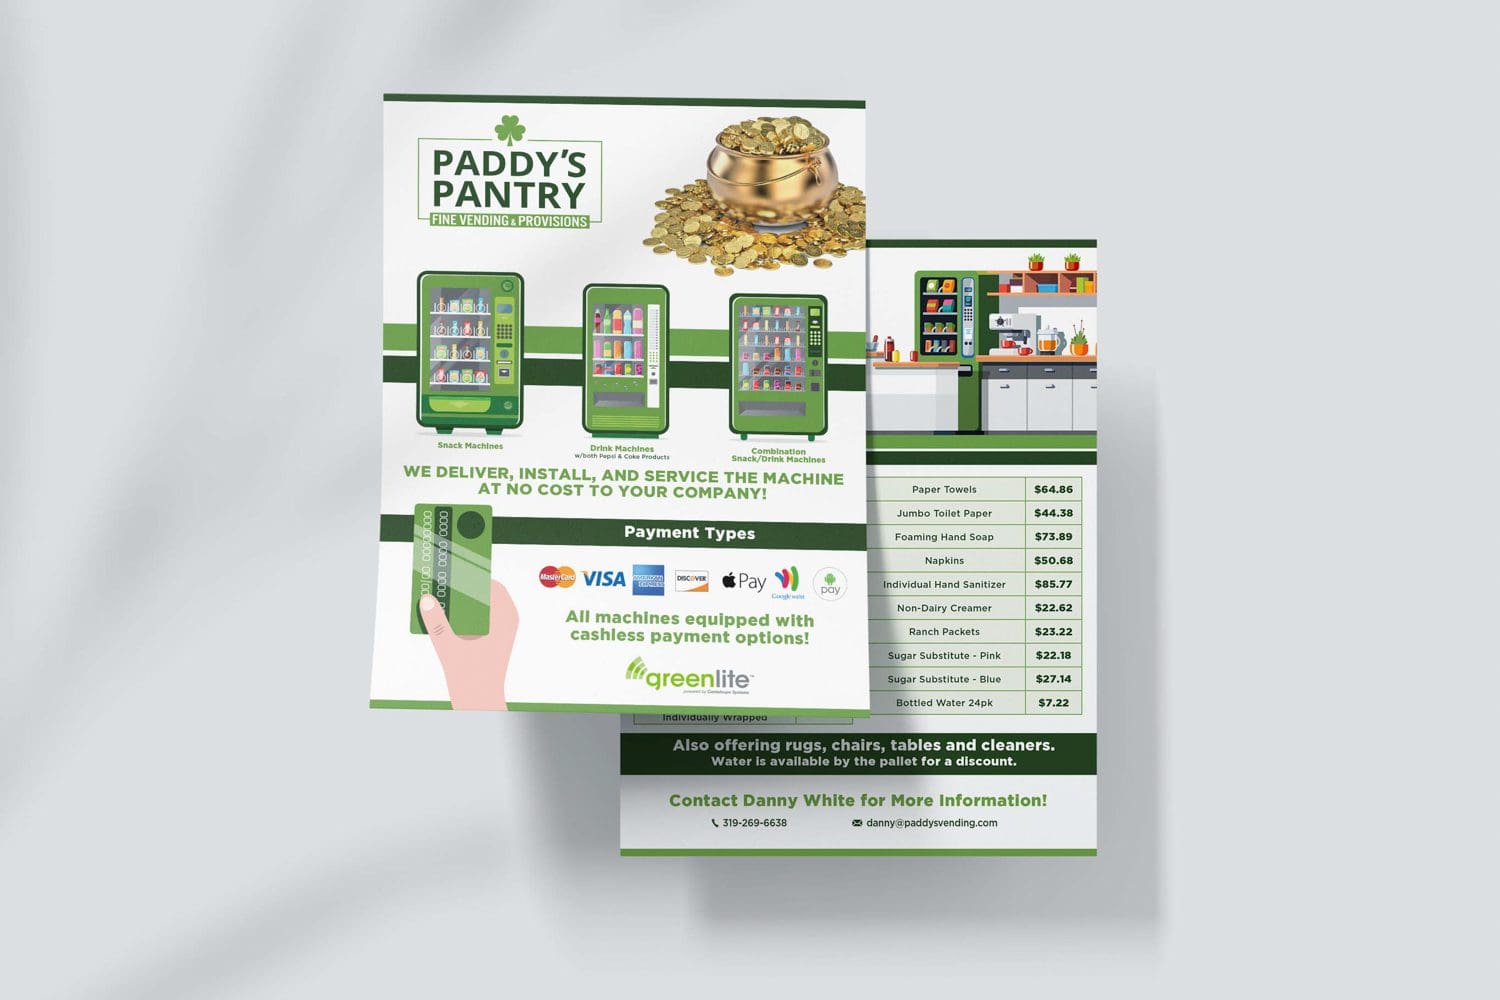 Paddys Pantry flyers